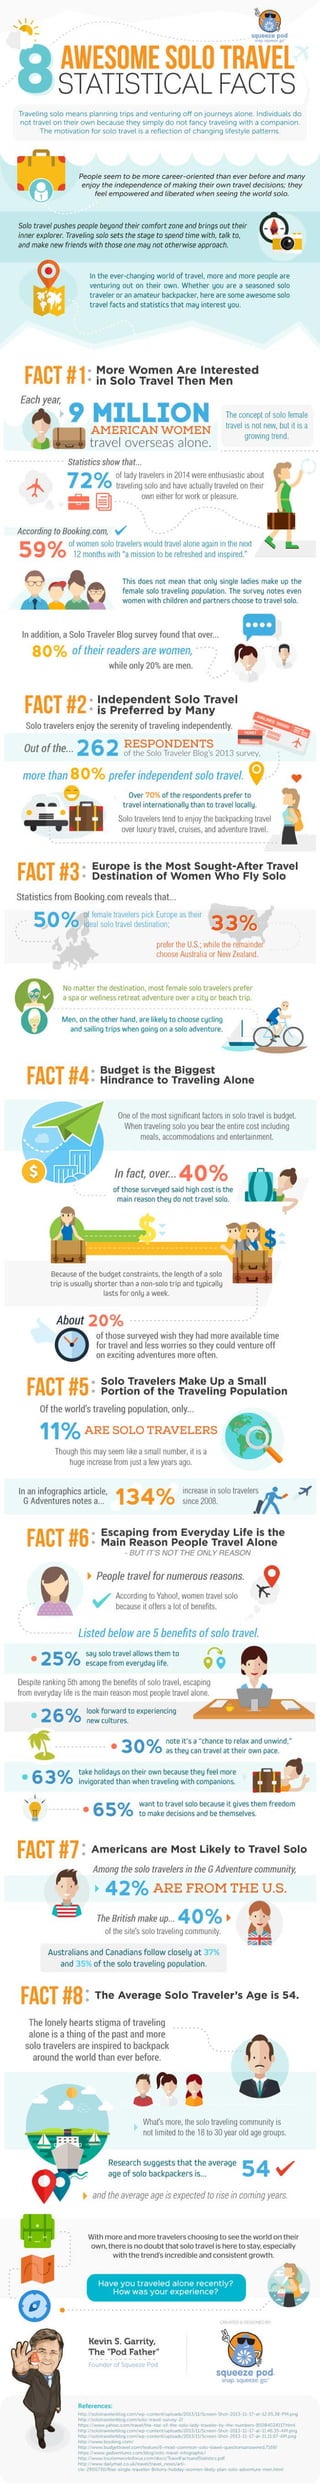 8 awesome-solo-travel-statistical-facts